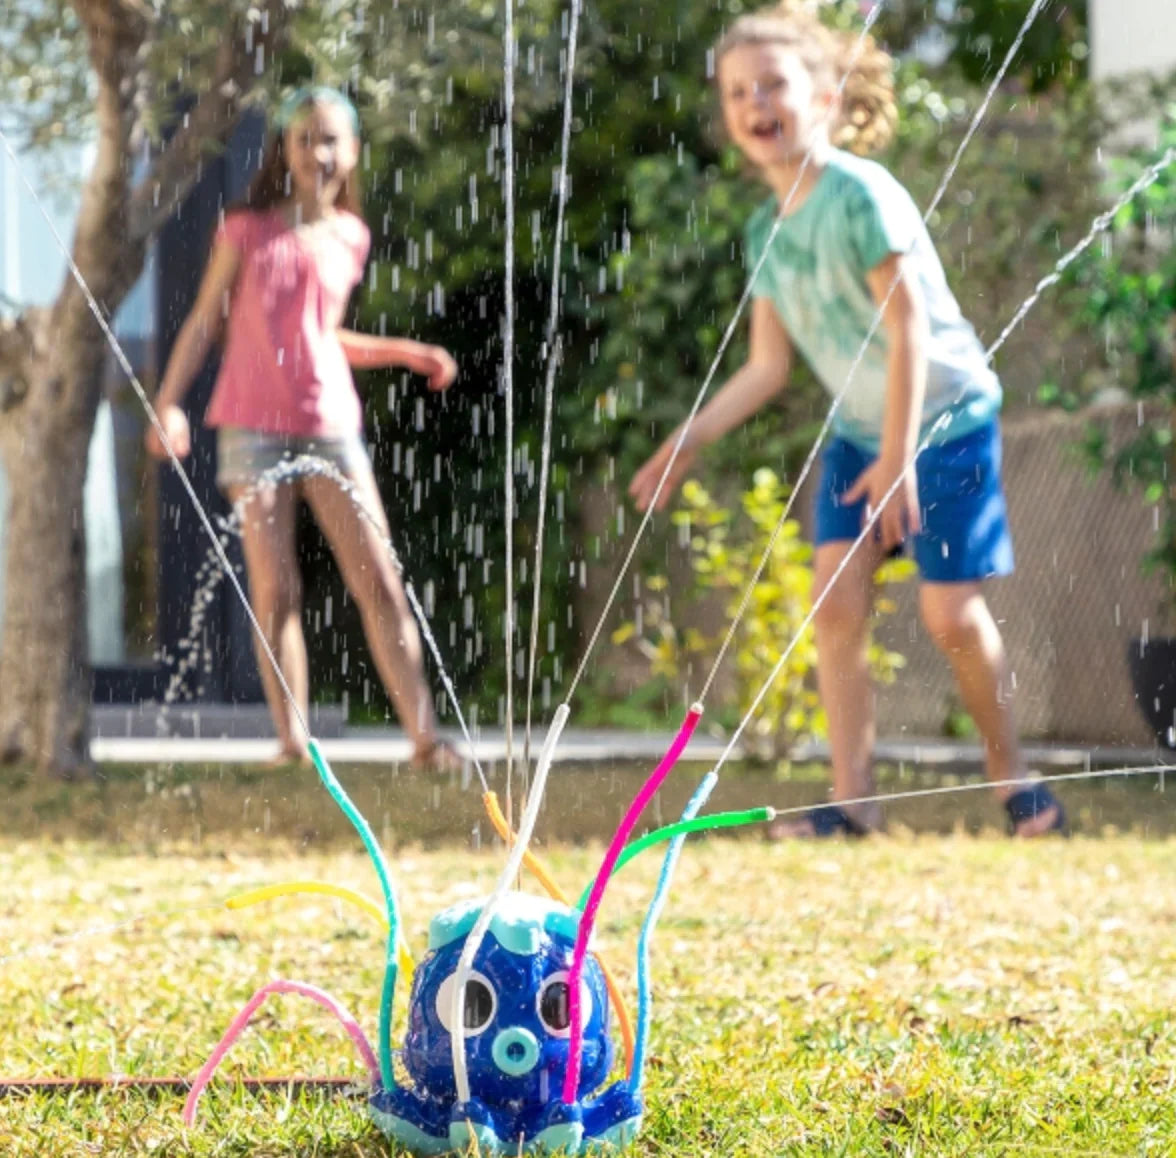 The funny octopus The ultimate sprinkler and sprayer for children 